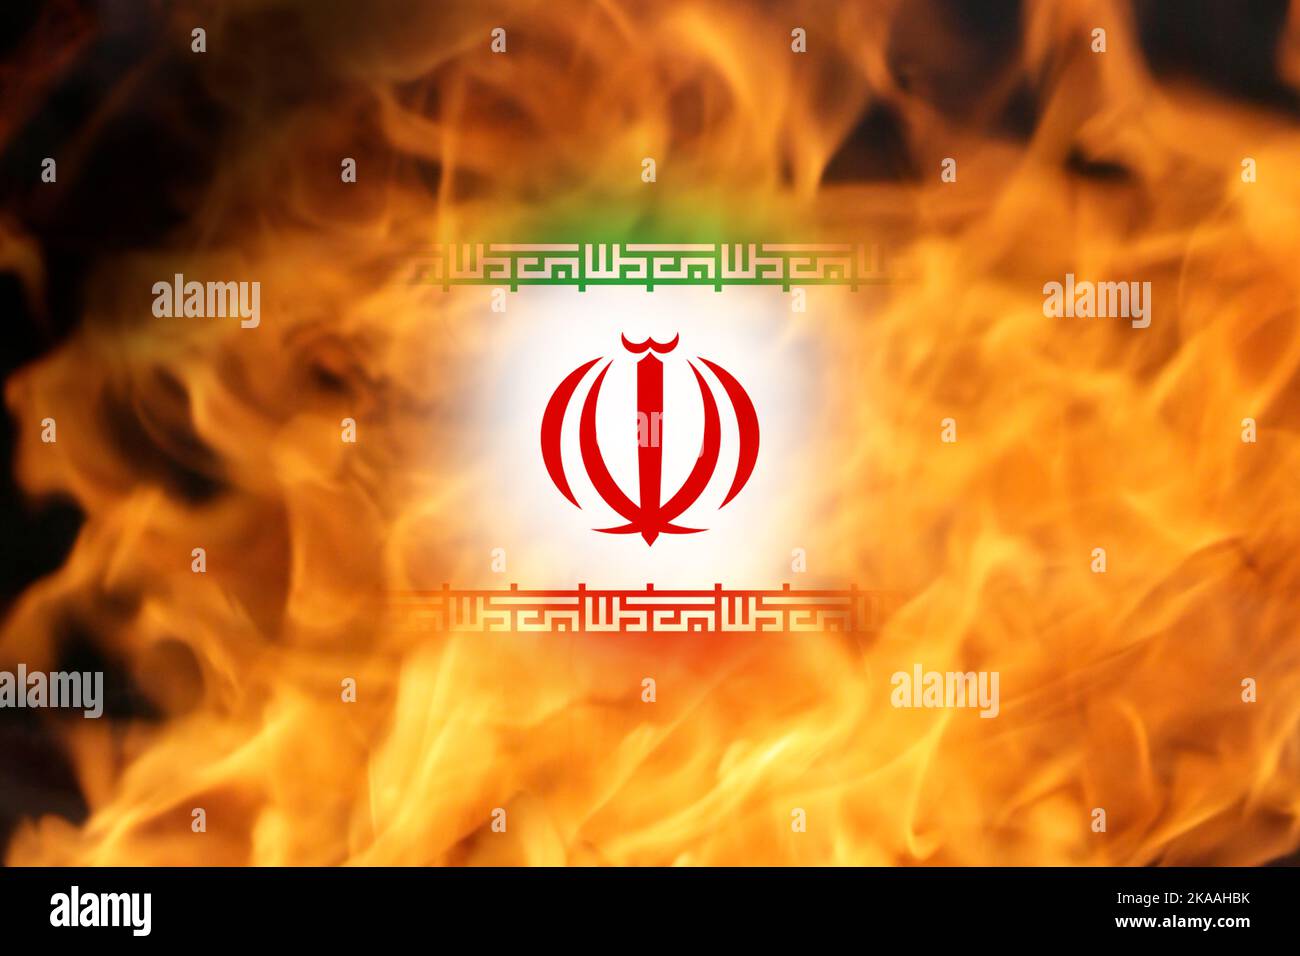 Defocus protest in Iran. Conflict war over border. Fire, flame. Country flag. Woman low rights. Out of focus. Stock Photo